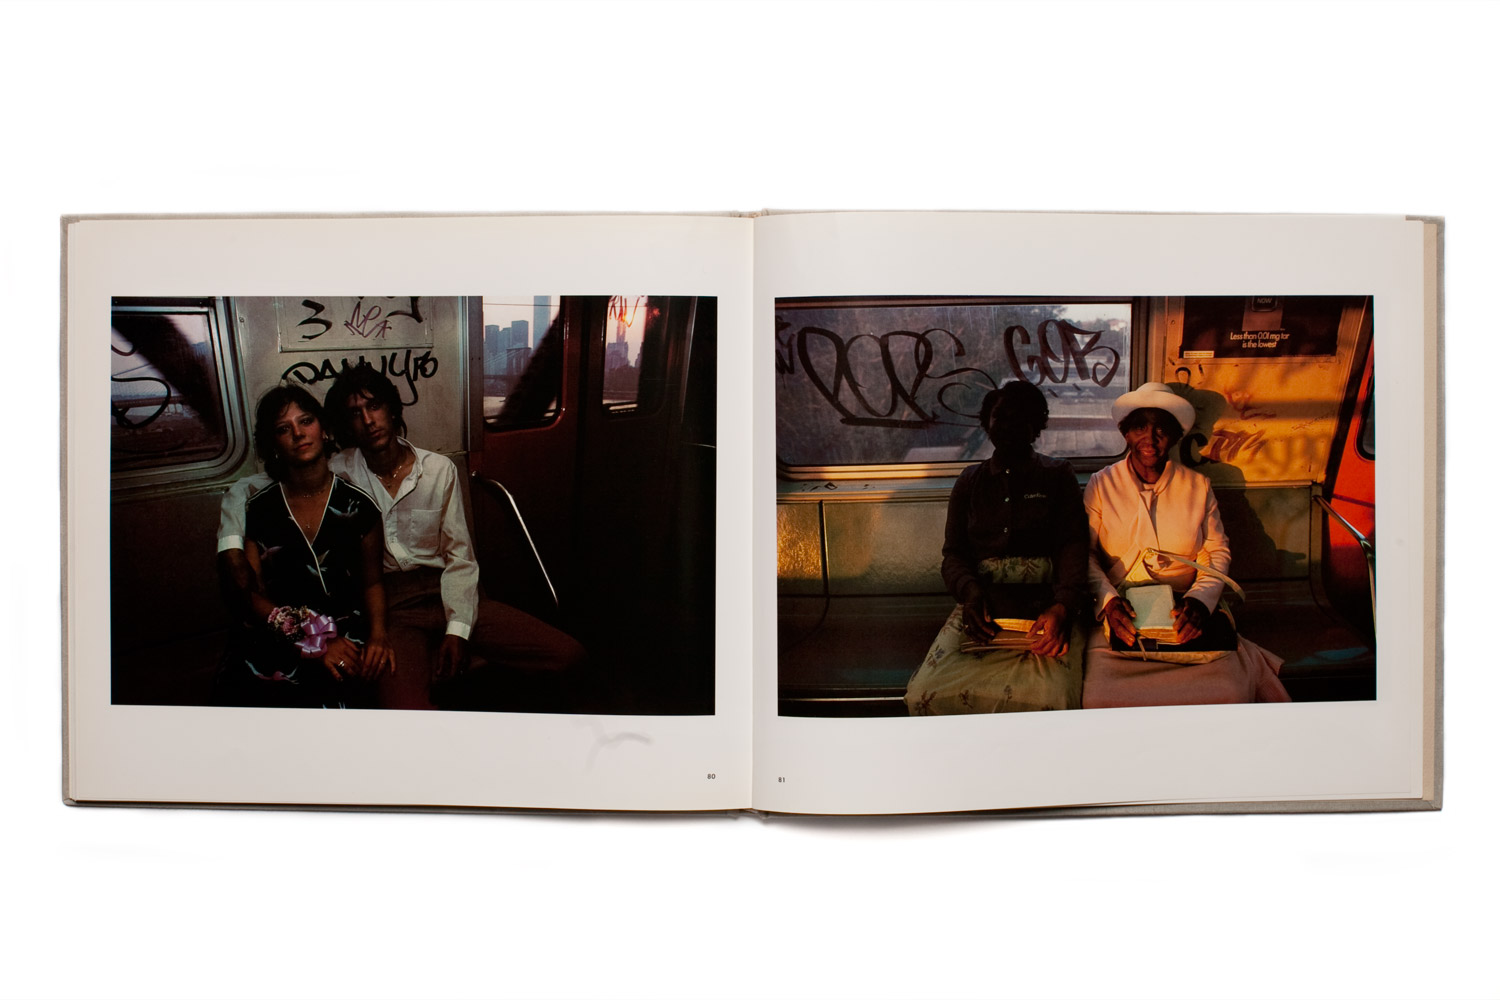 In 2003, for a second printing of the book, Bruce Davidson added 42 additional photographs not included in the original edition.